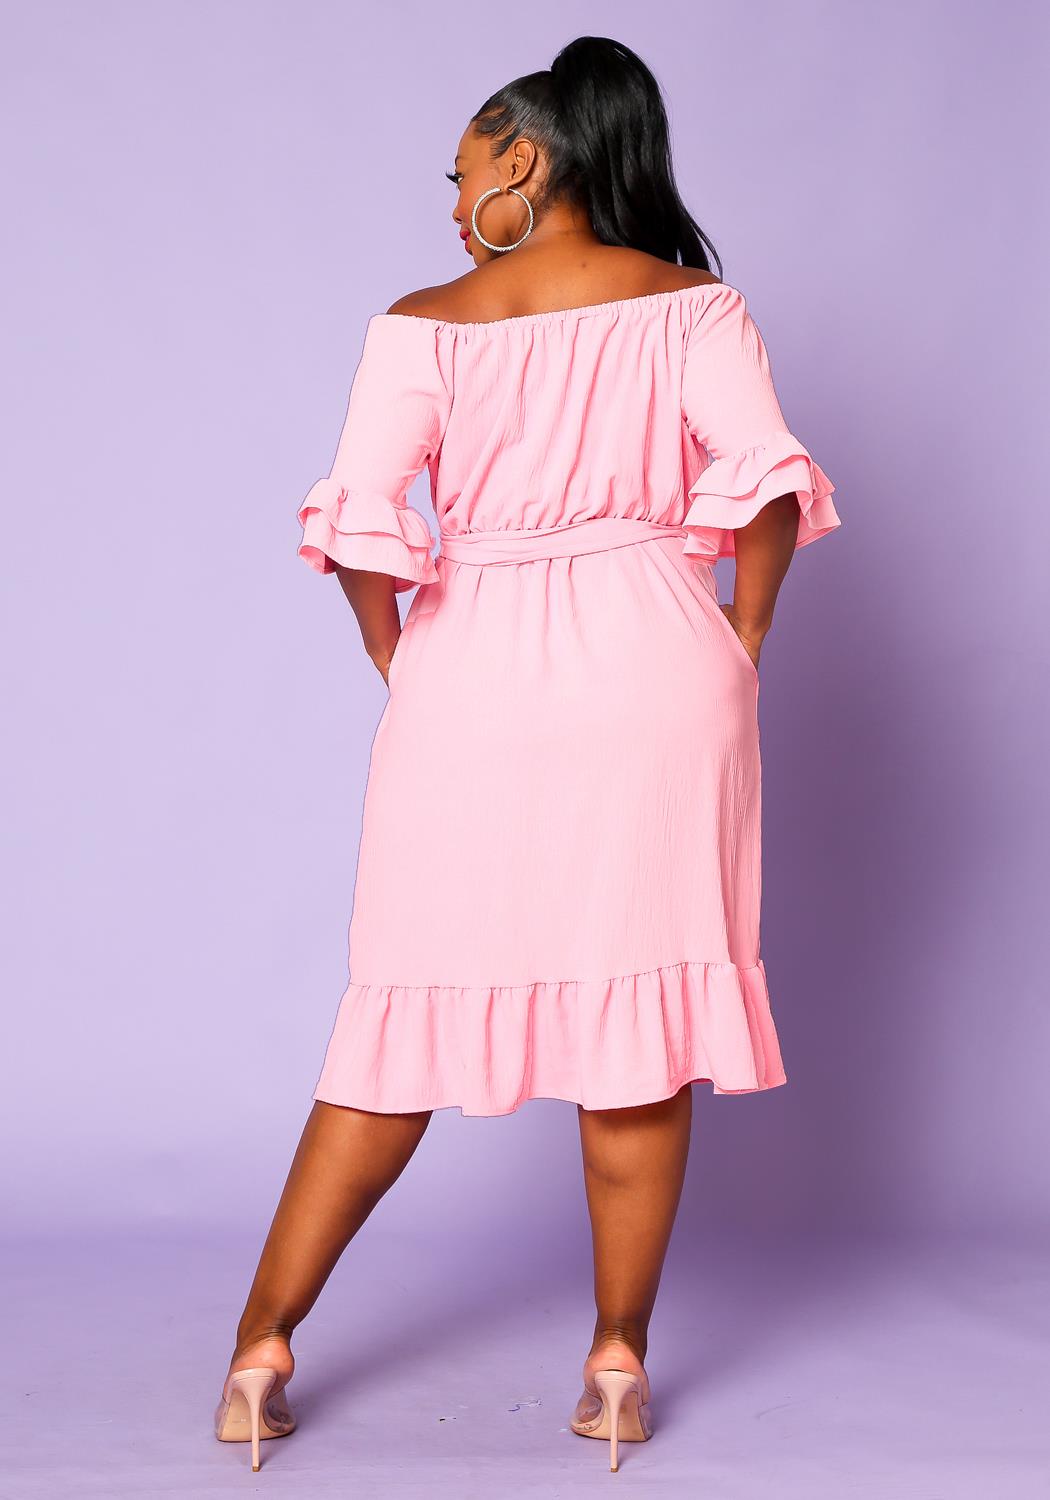 Hi Curvy Plus Size Off the Shoulder Fit and Flare Dress